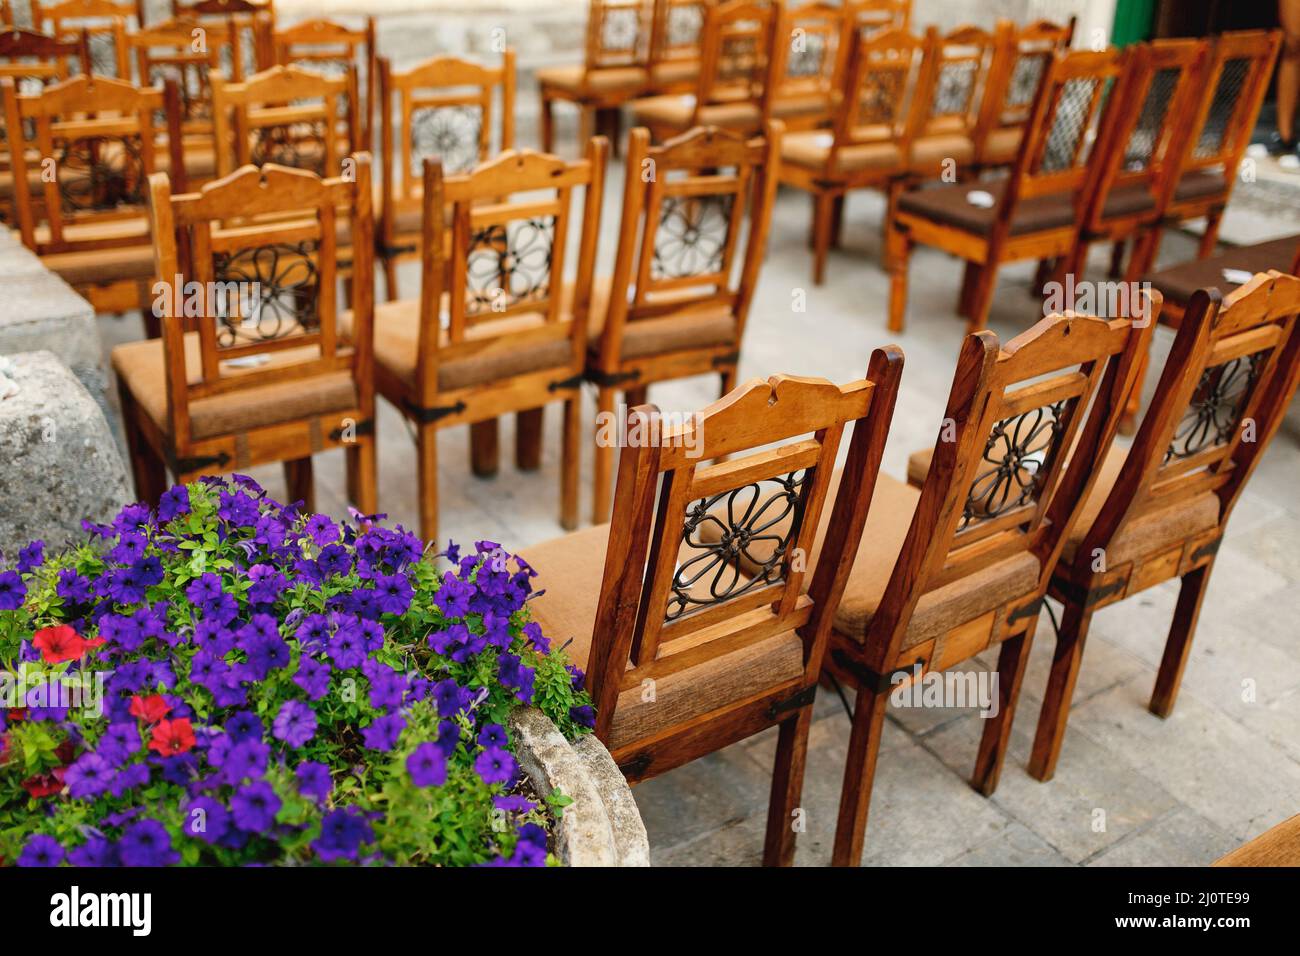 Wooden chairs with patterns on the backs stand in rows on paving stones Stock Photo